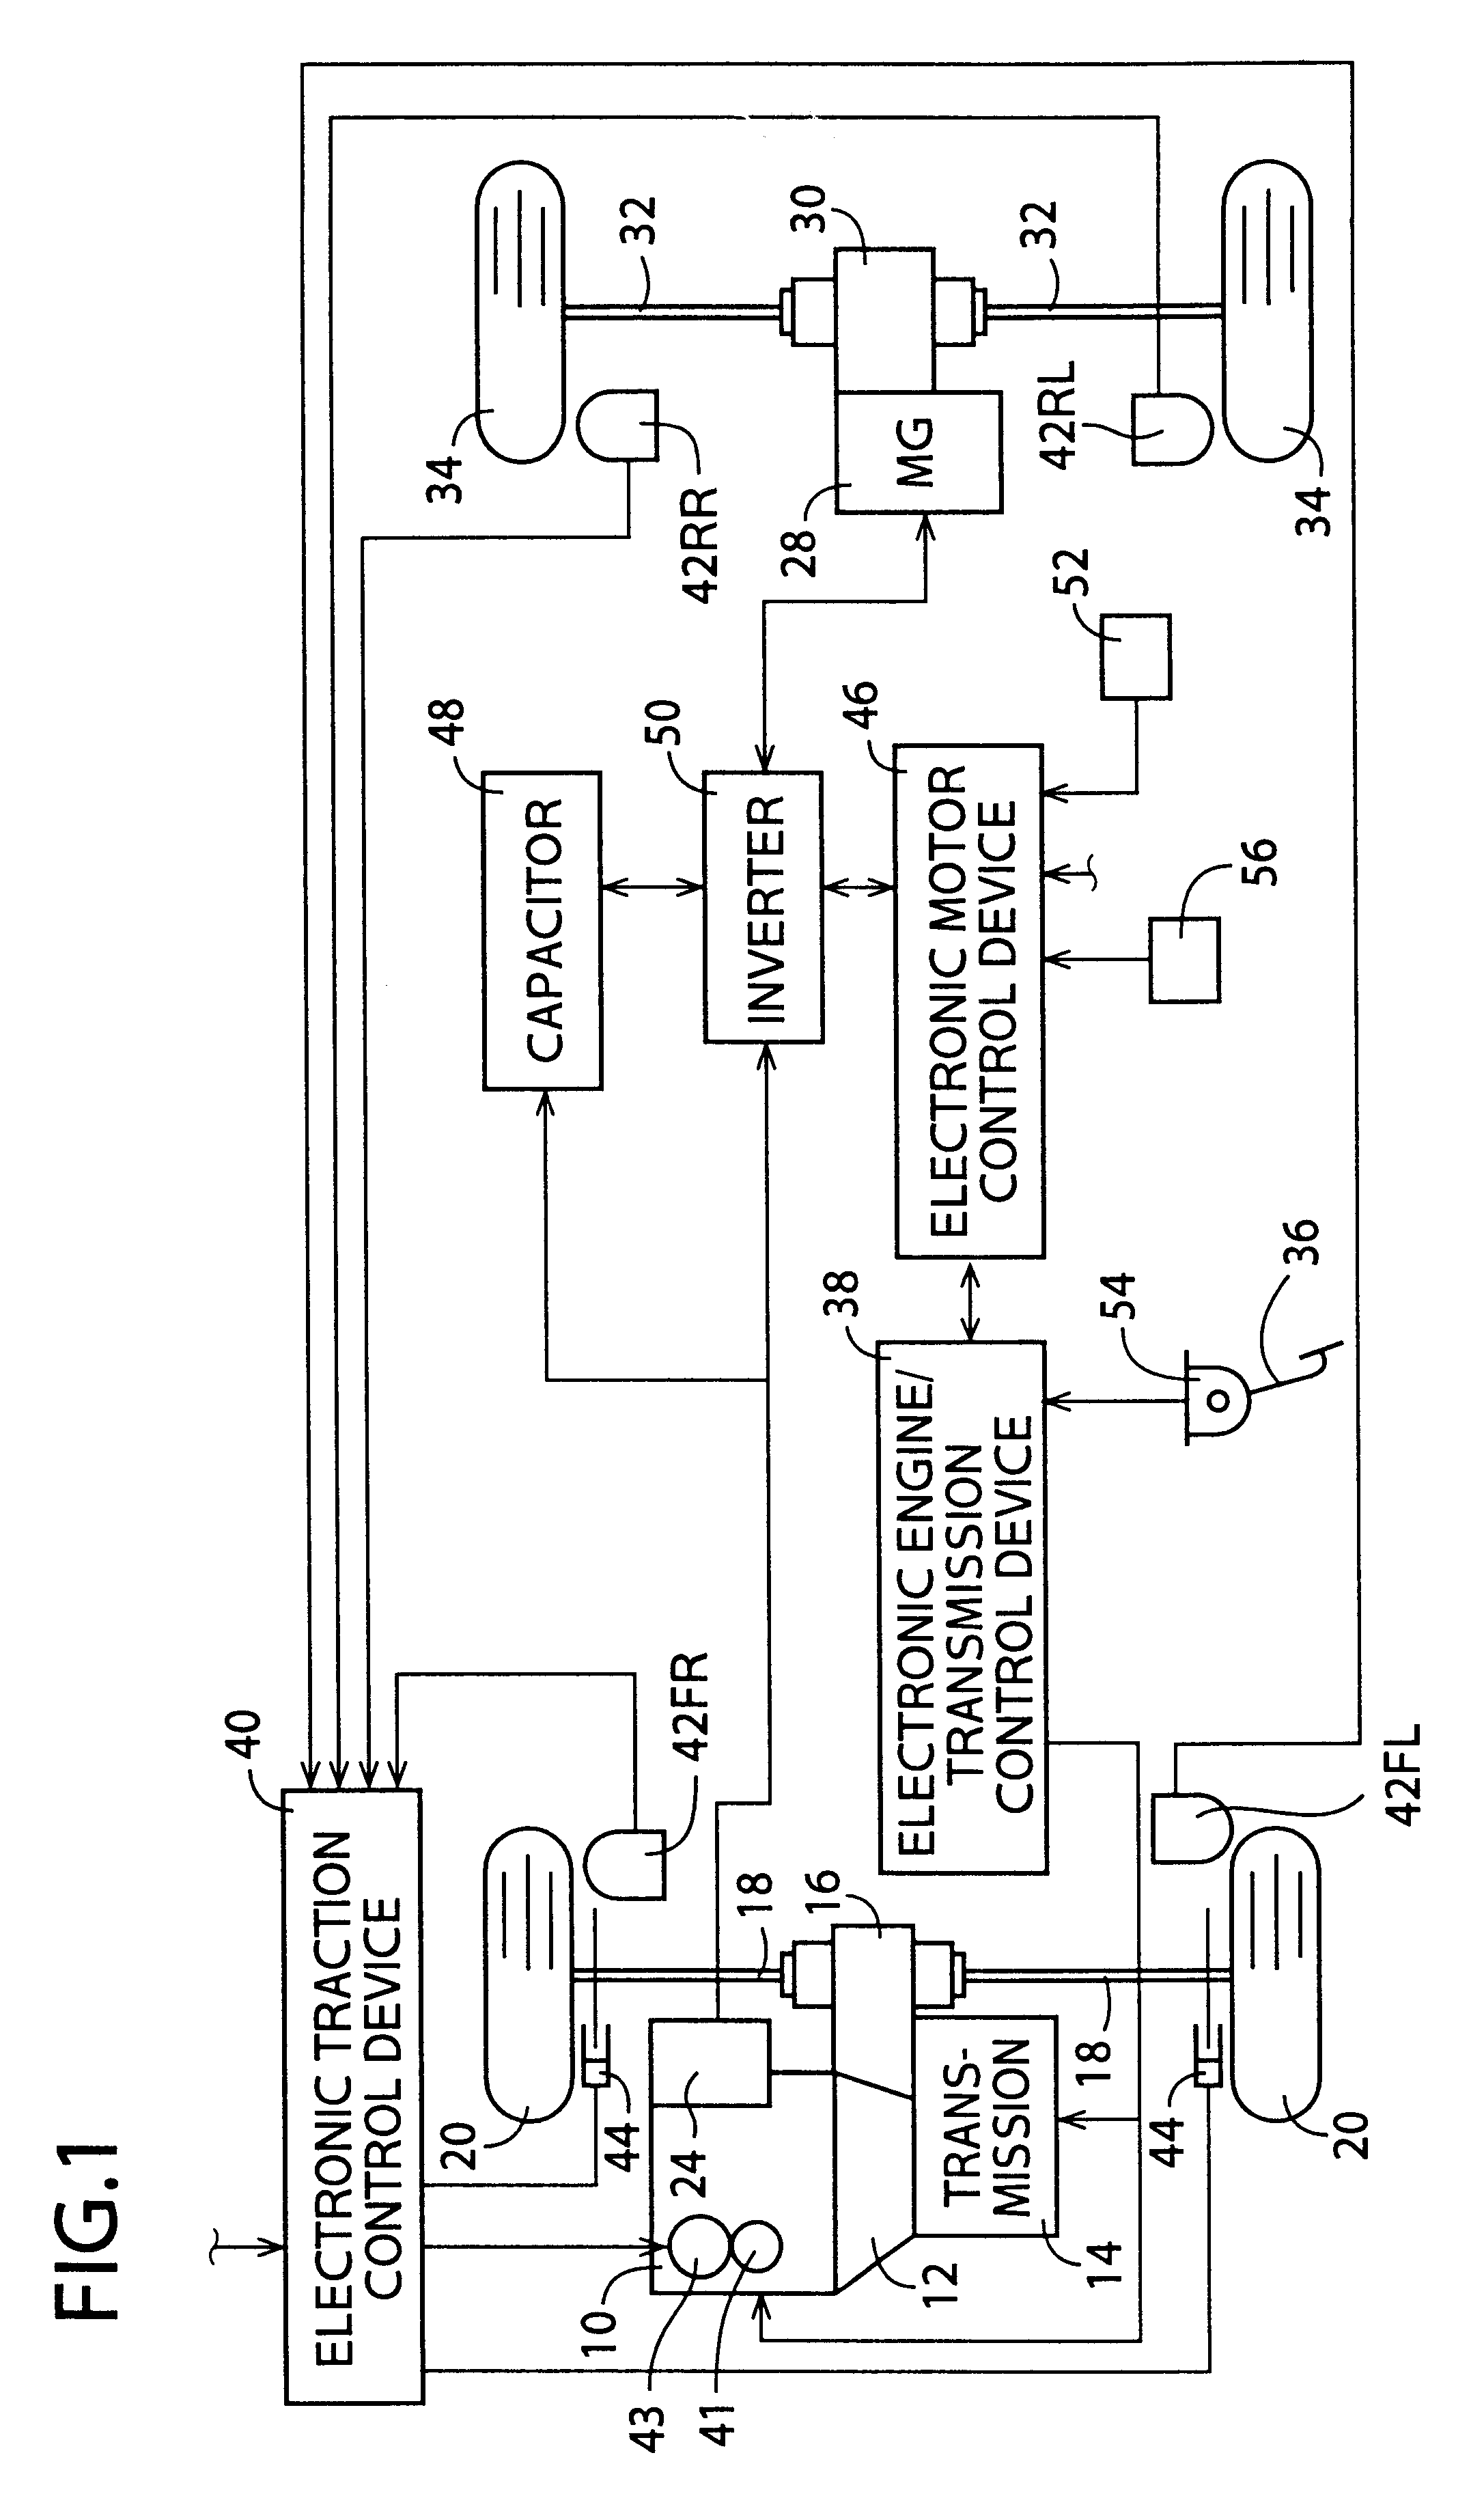 Apparatus for controlling automotive vehicle having a plurality of drive power sources